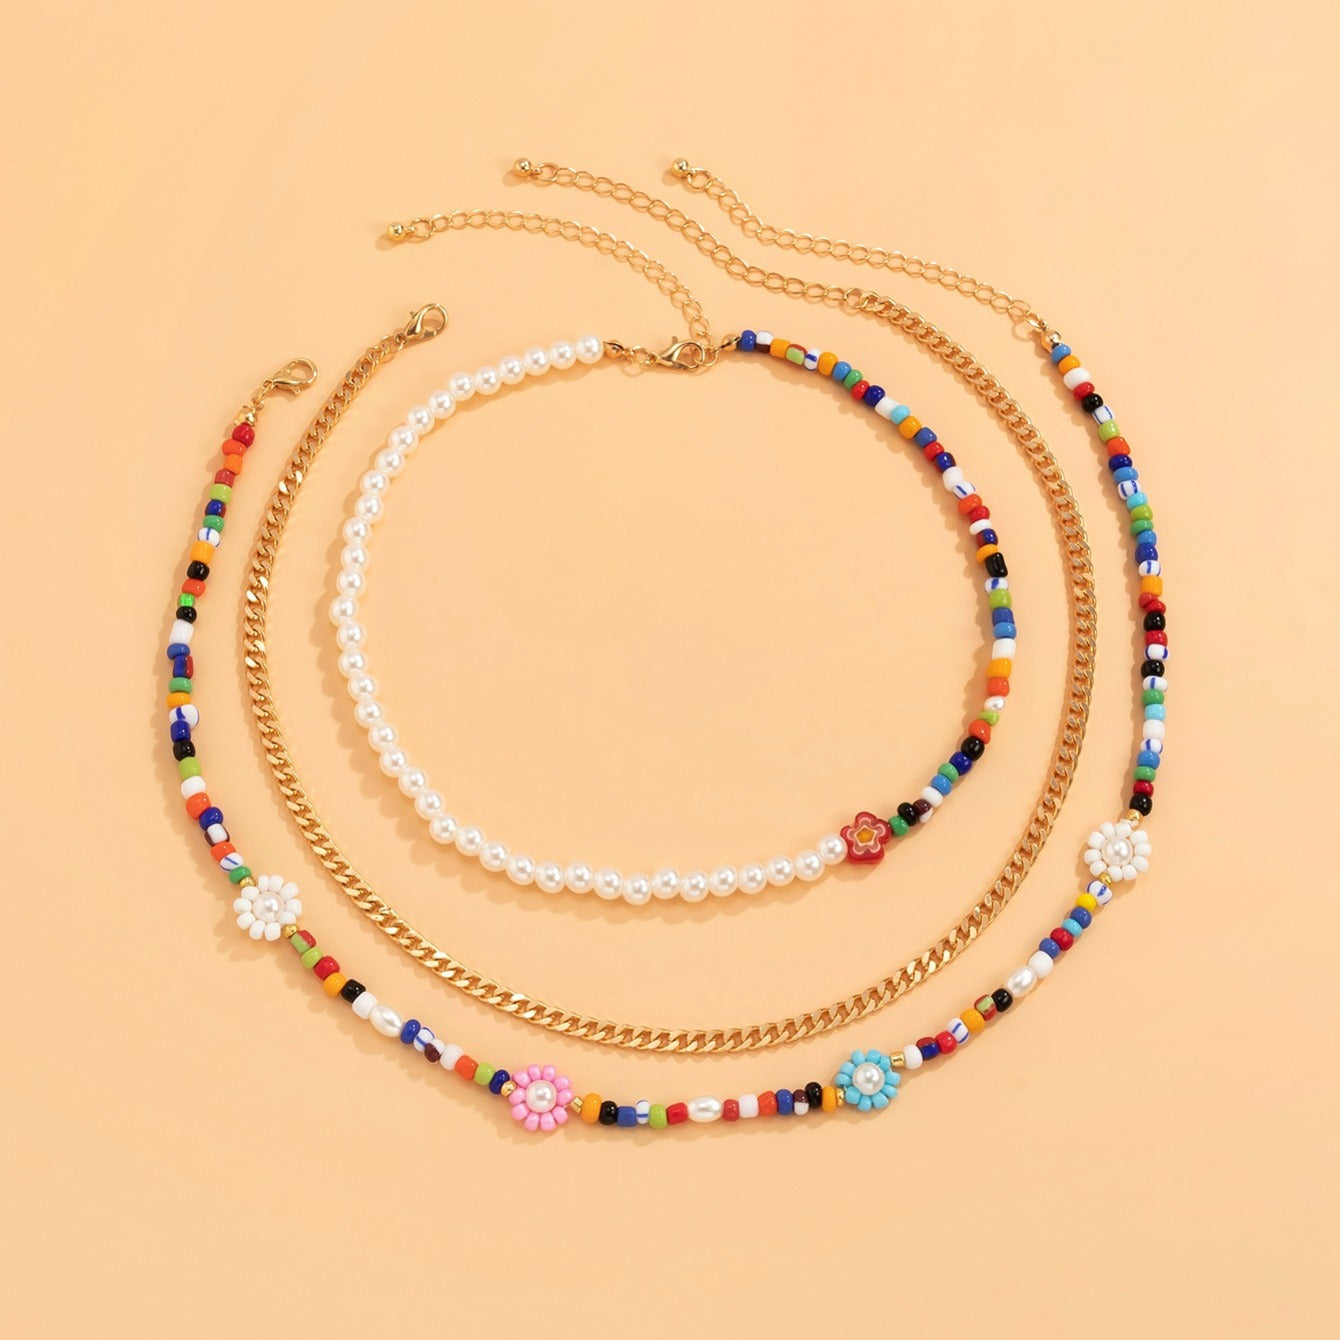 Gorgeous 3-Piece Colorful Pearl Decor Beaded Necklace - Handmade with Love!